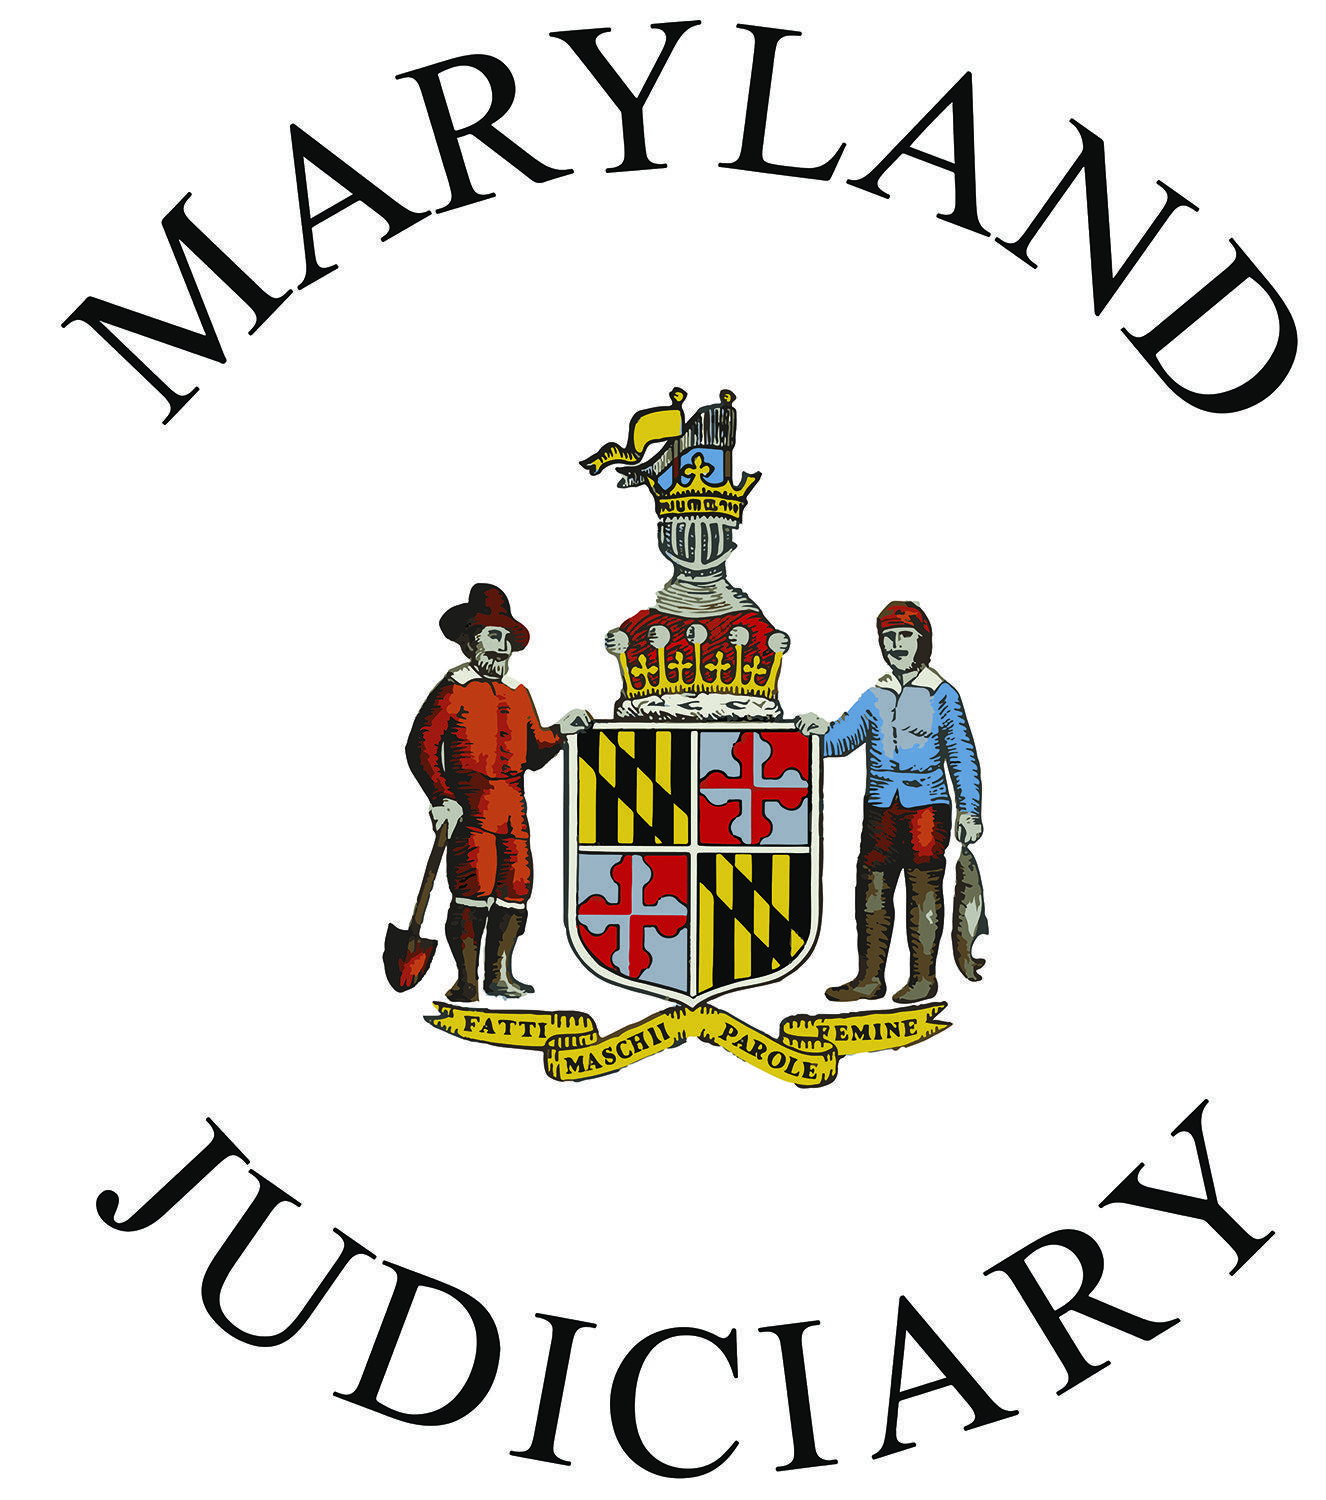 Judiciary Logo - Assistant Manager, School of Judicial Education in Annapolis